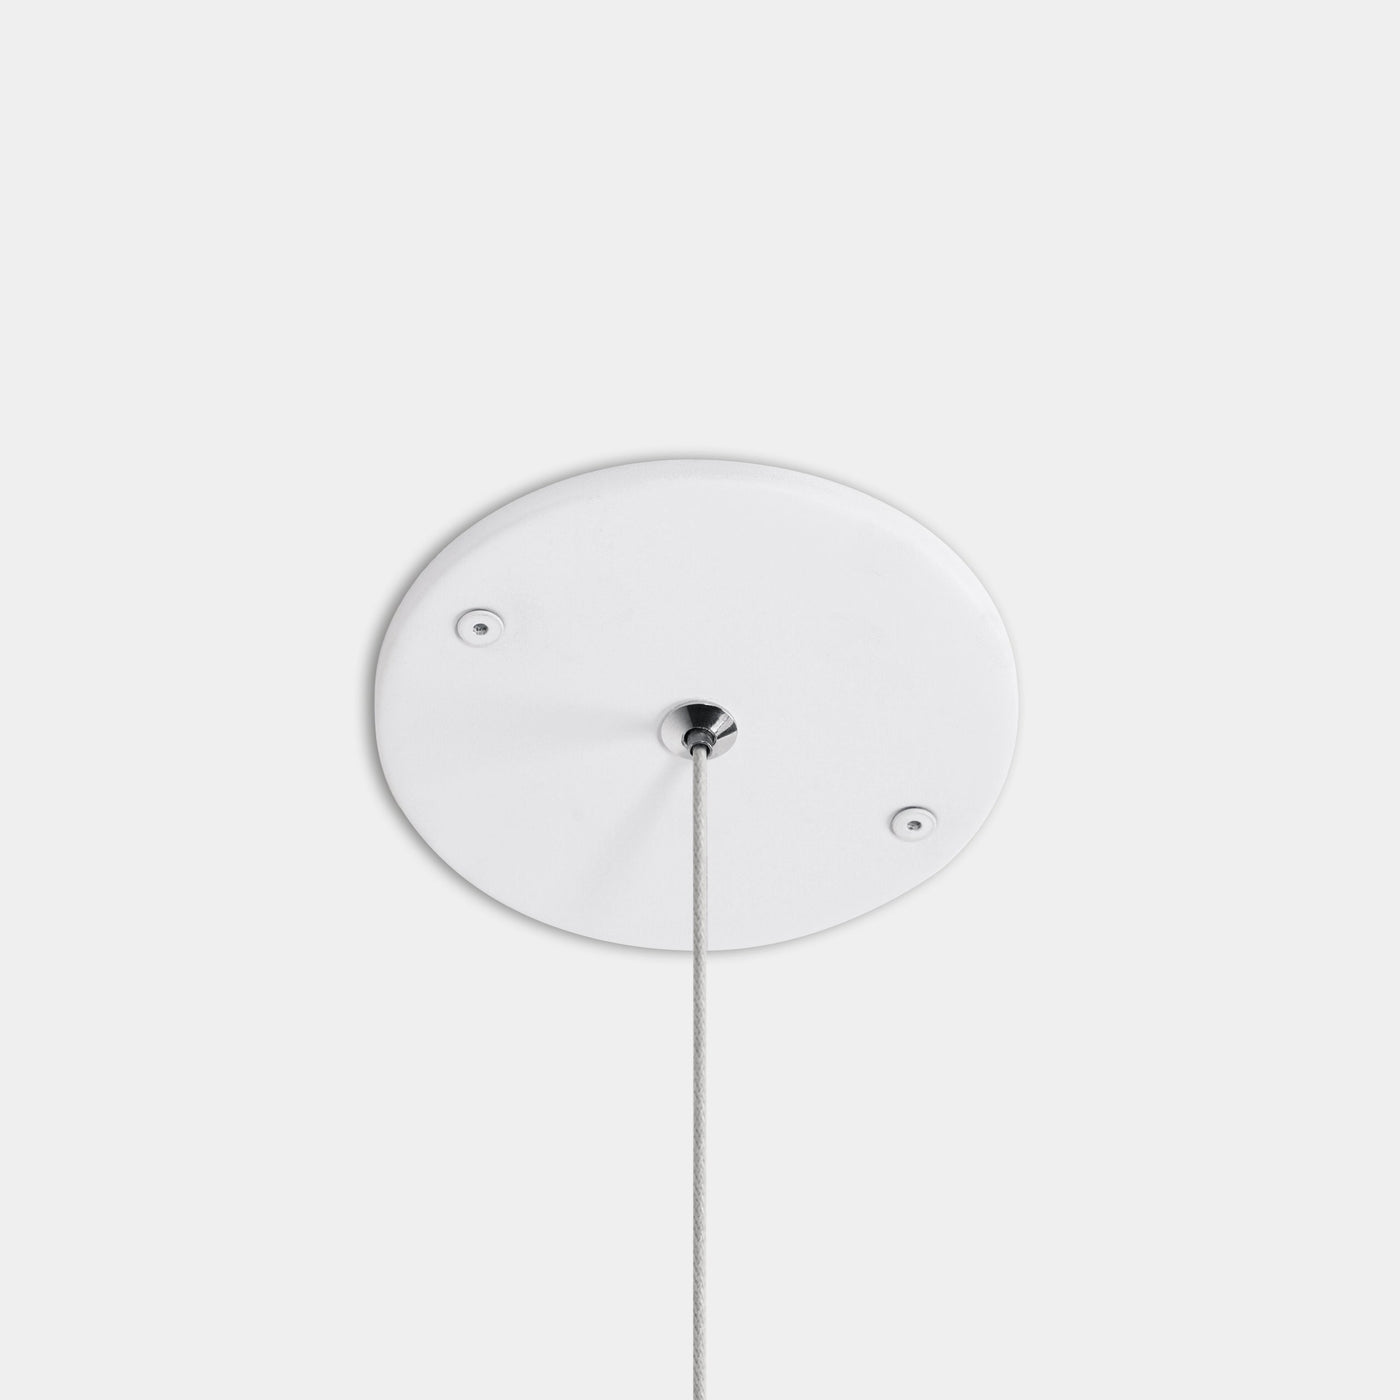 An Anony Glass 120 Pendant white ceiling light with a round light fixture.